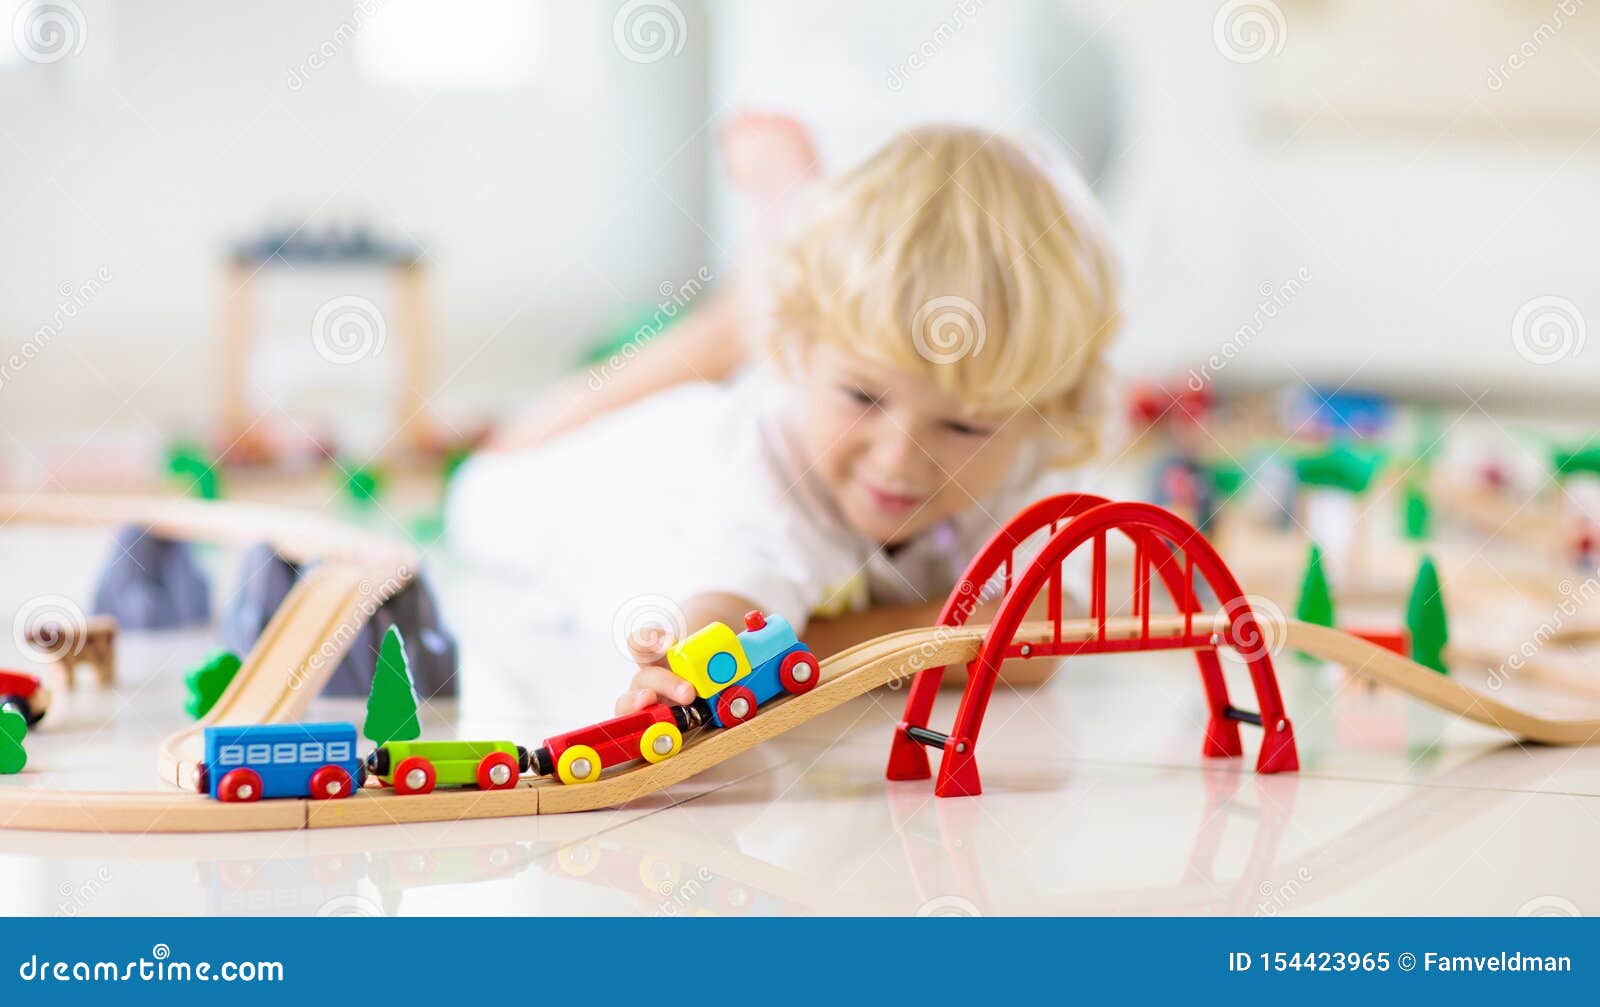 Kids Play Wooden Railway. Child with Toy Train Stock Image - Image of ...